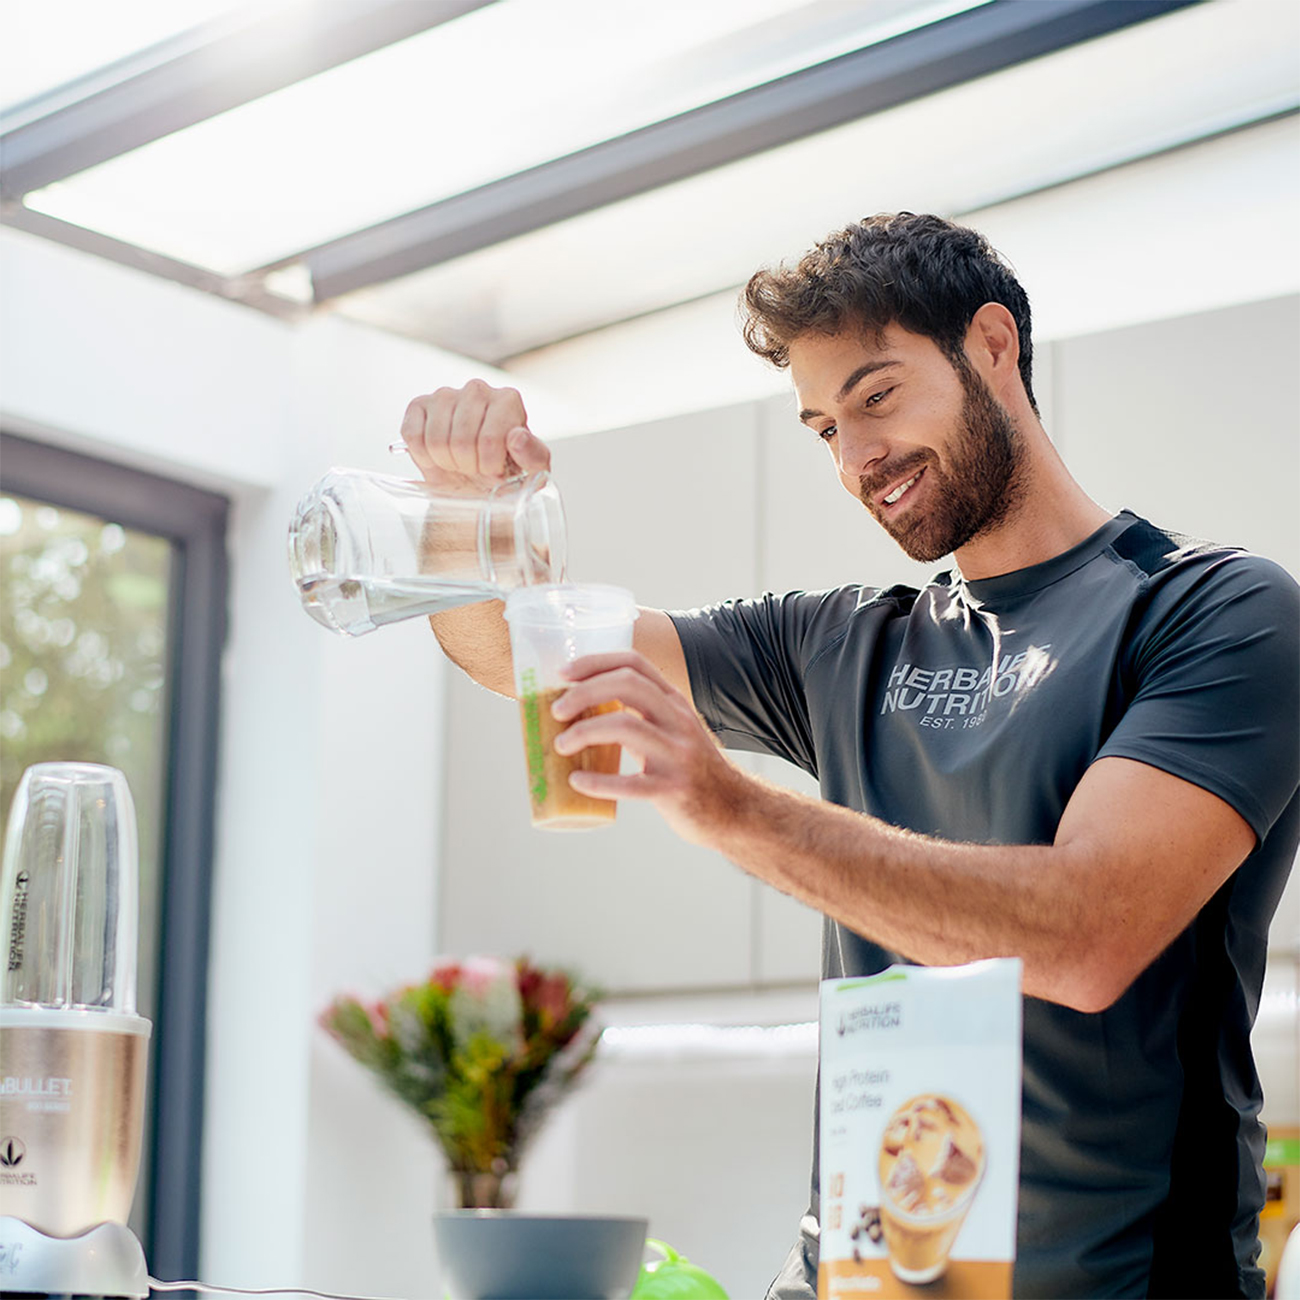 https://assets.herbalifenutrition.com/content/dam/regional/nam/en_ca/sites/herbalife_nutrition/web_graphic/billboards/2021/11-Nov/man-pouring-herbalife-nutrition-high-protei-%20iced-coffee-in-a-glass.jpg